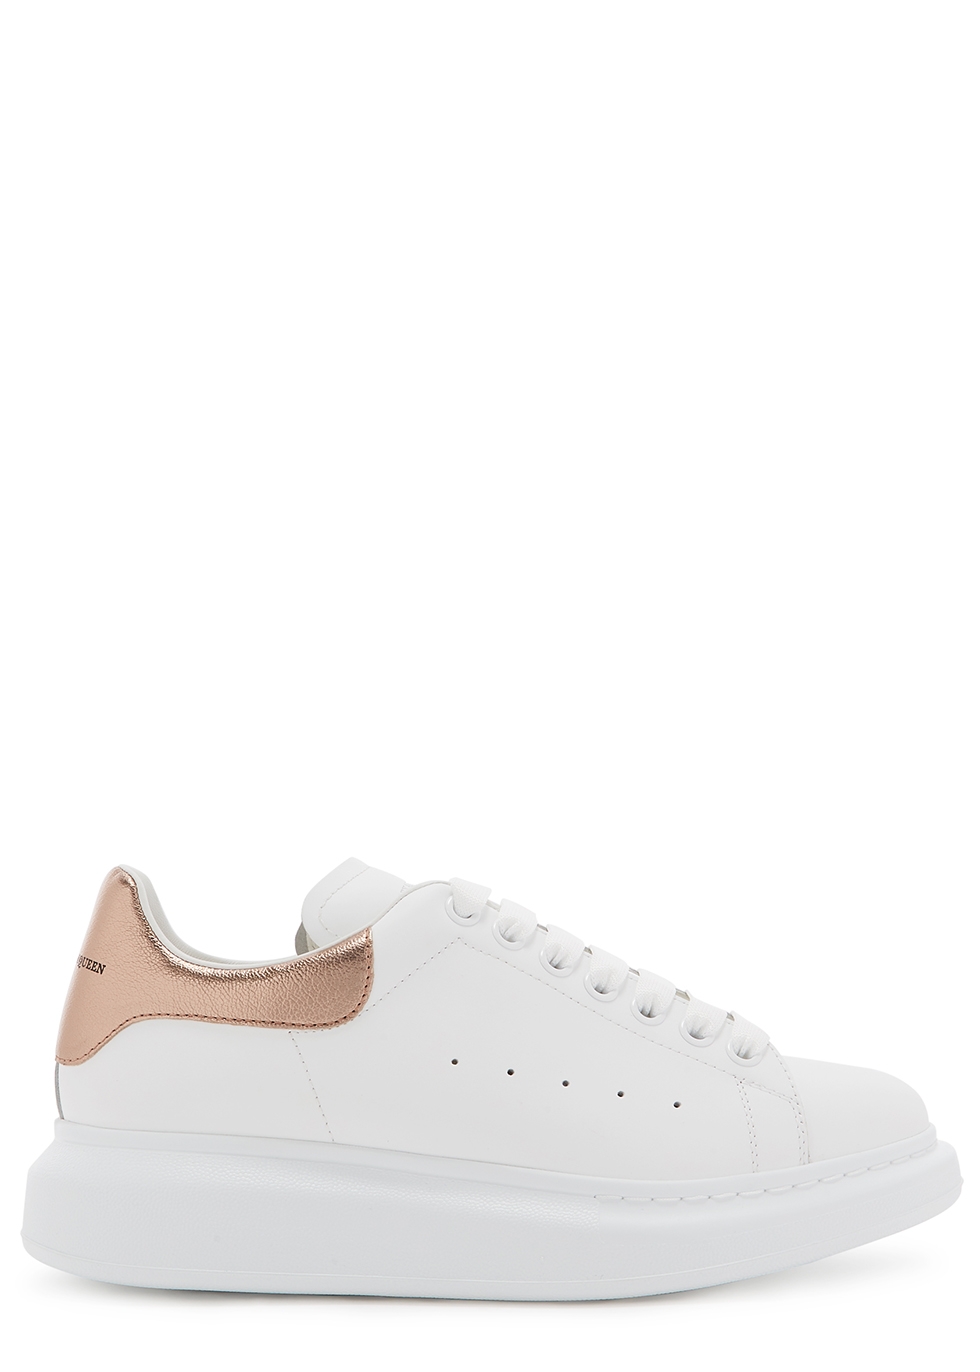 Alexander McQueen Larry white leather 